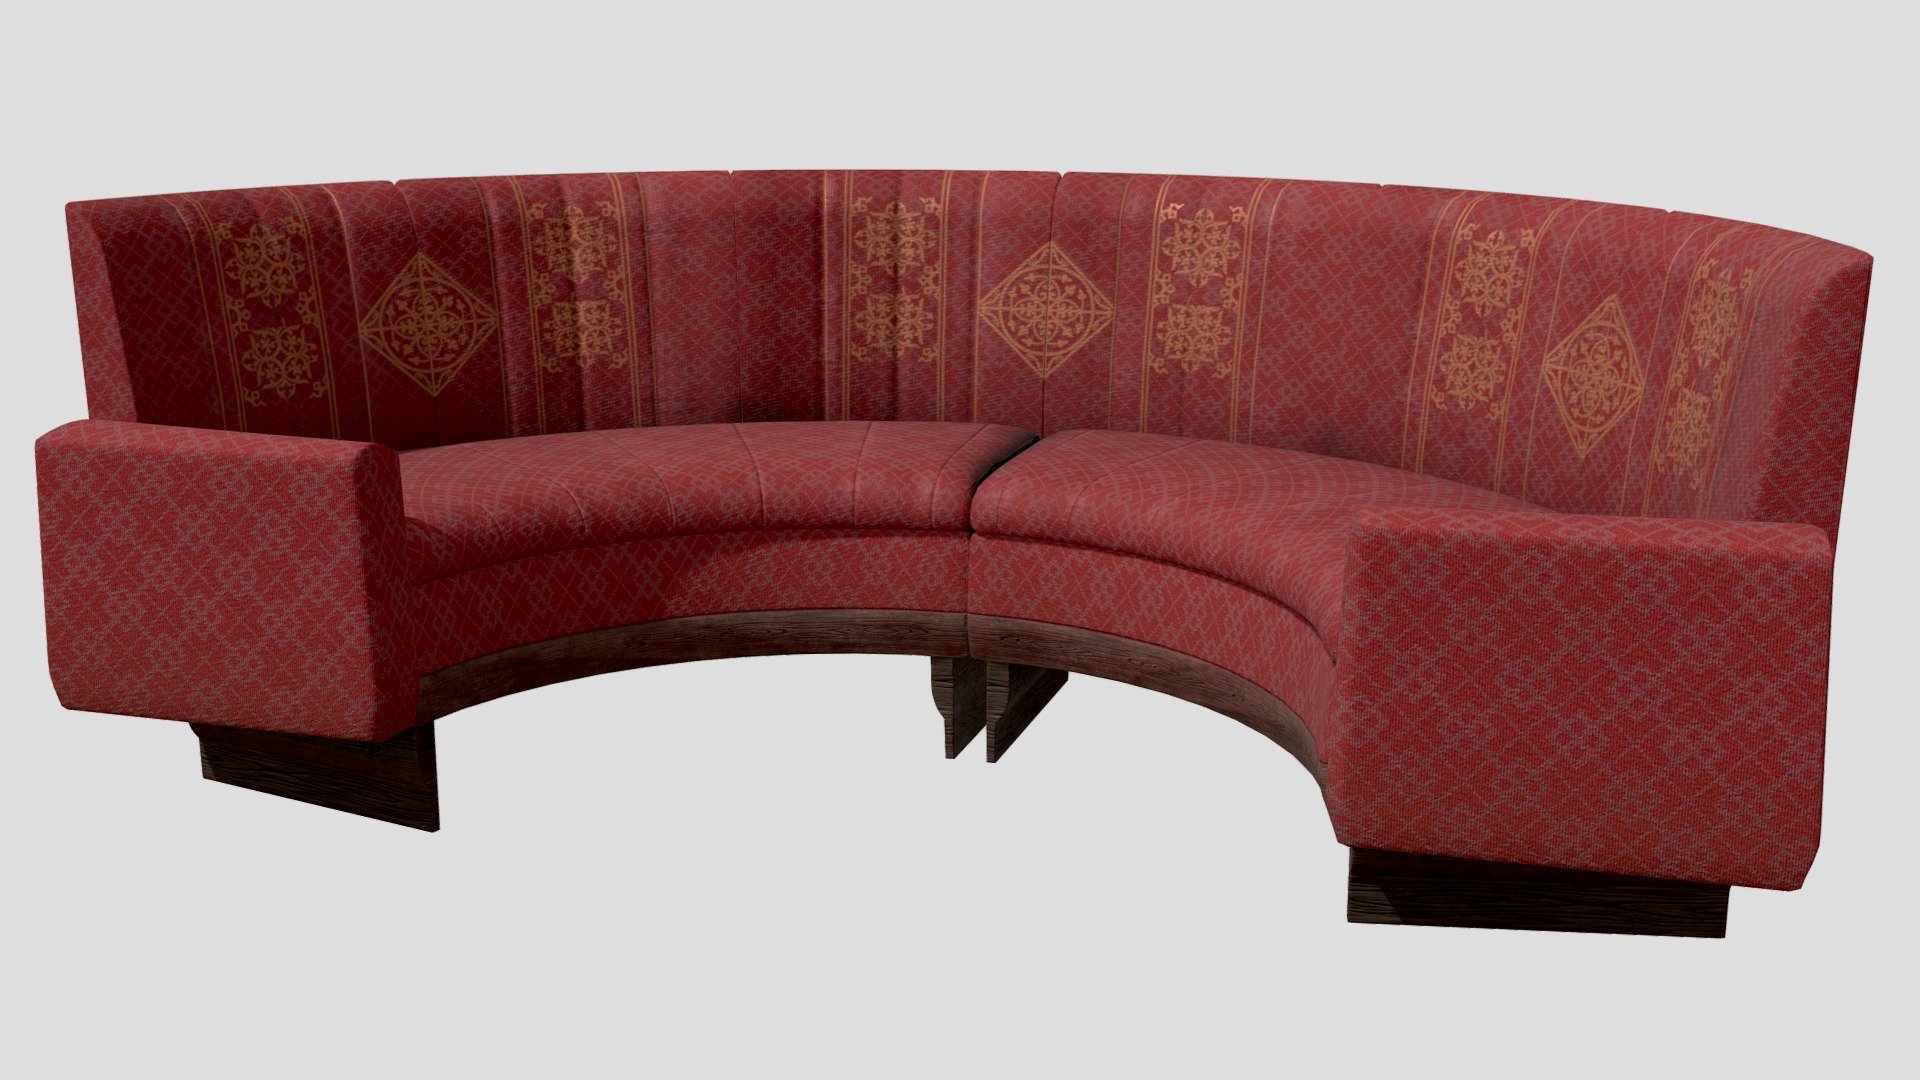 Vintage Curved Bar Couch

Dimension (mm) : 2800 x 1400 x 1000





Zip file contains mesh file and texture file.




Texture files contains :




Base color (4k)



Metallic (4k)

Normal (4k)

Roughness (4k)

Ambient Occlusion (4k)

ORM (2k)

Game ready asset
 - Vintage Curved Couch - Buy Royalty Free 3D model by Atris (@studioatris) 3d model